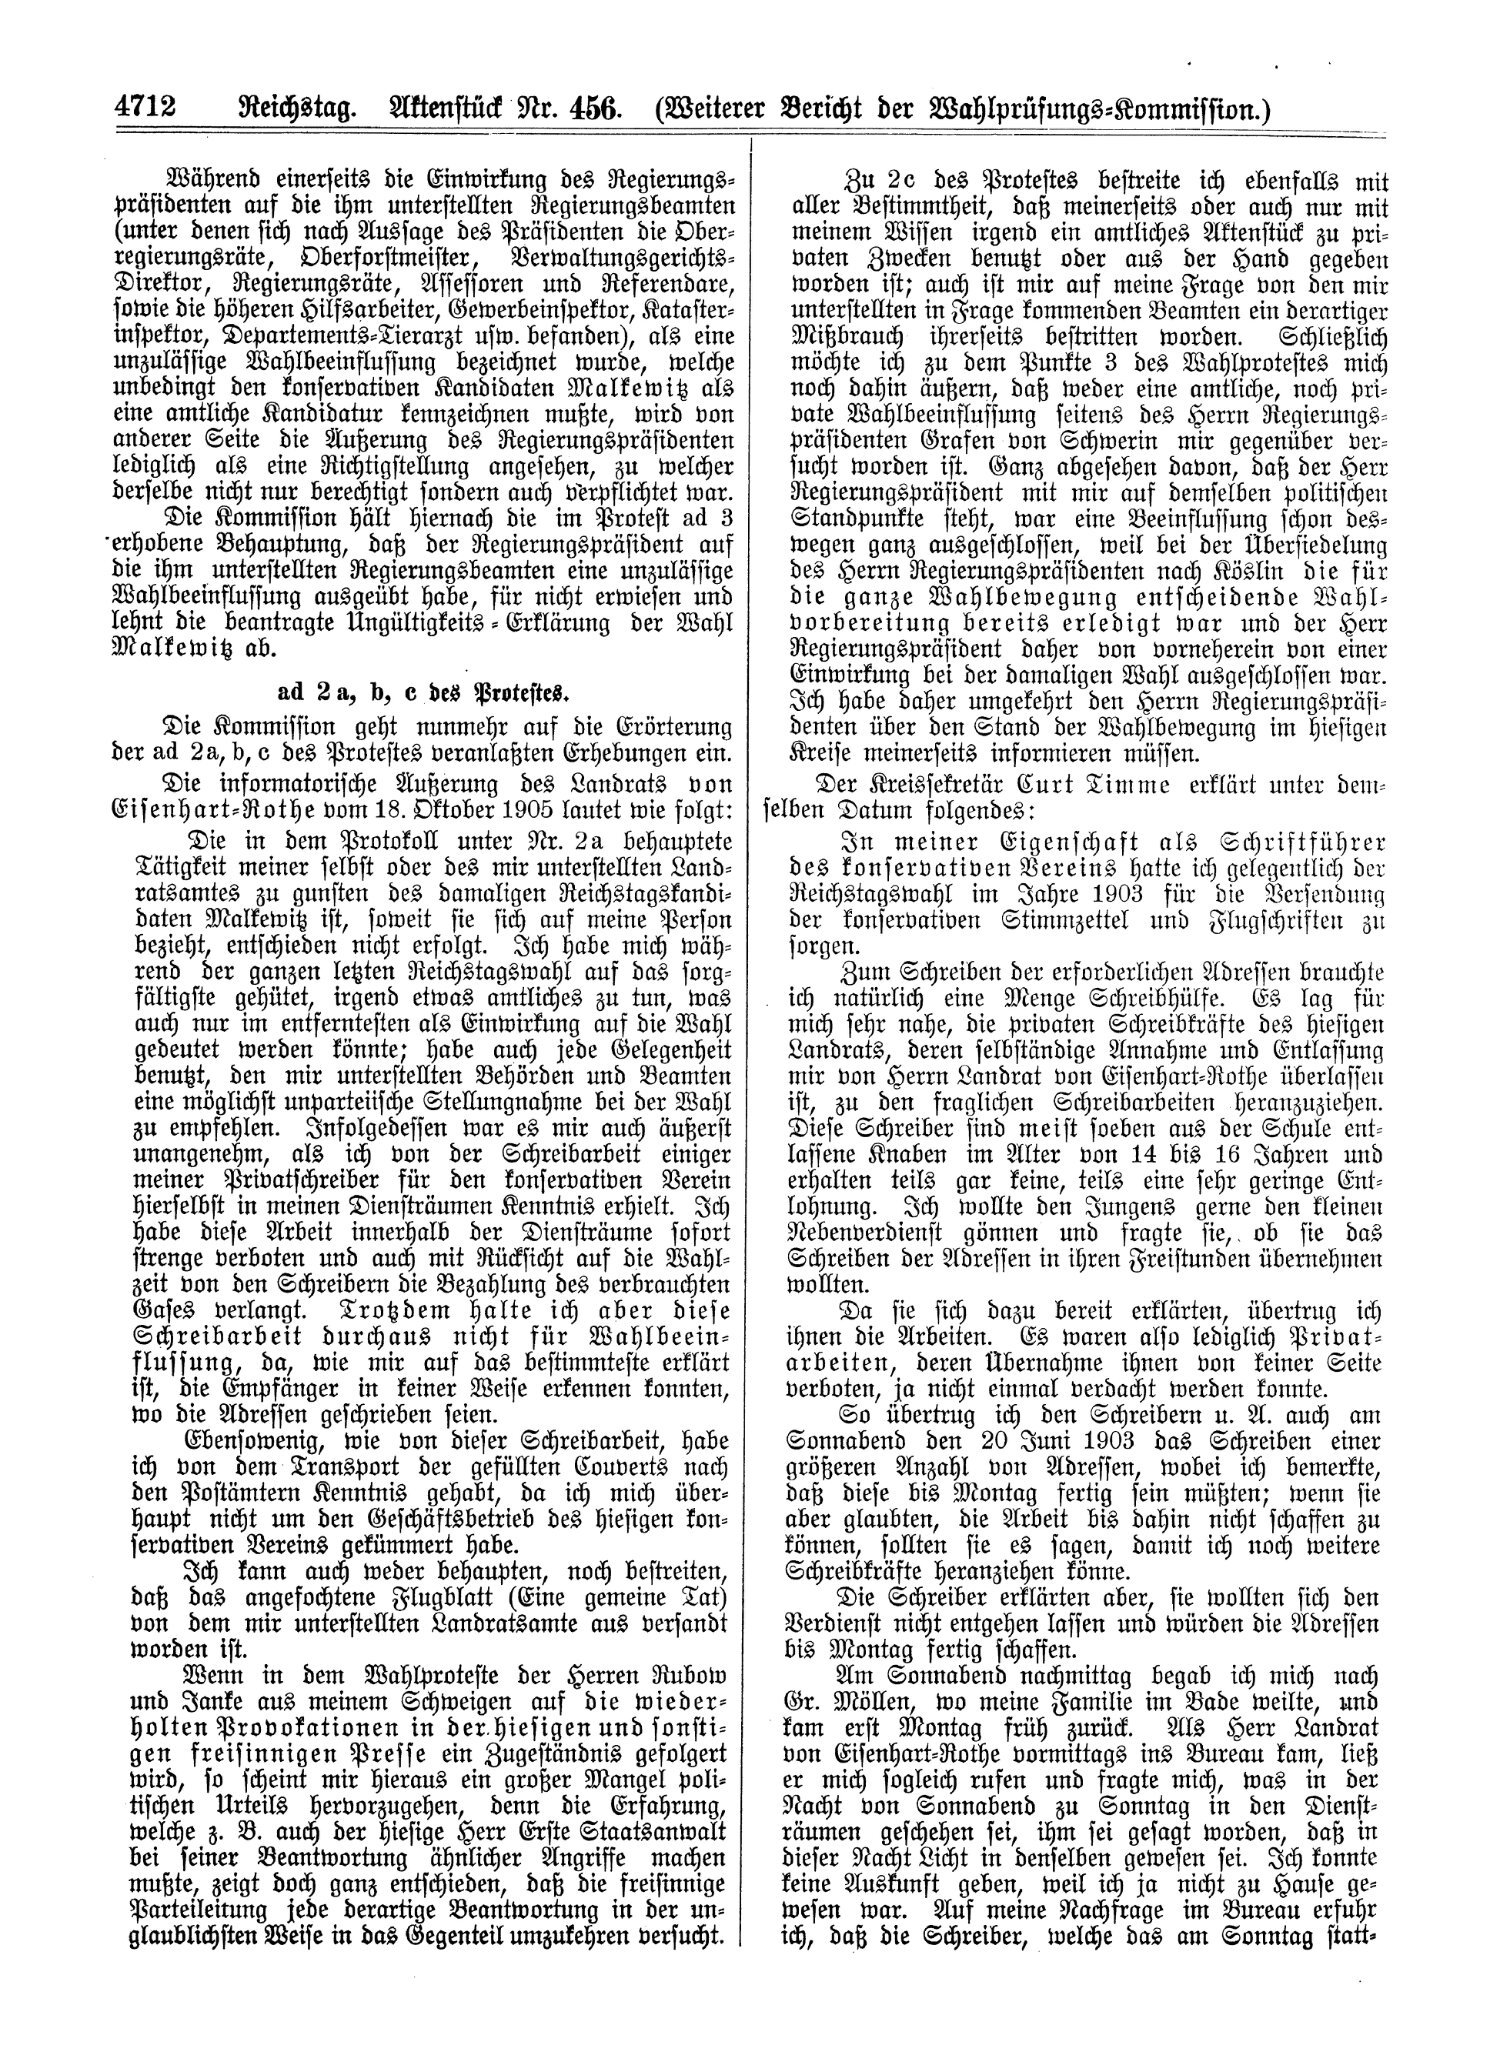 Scan of page 4712